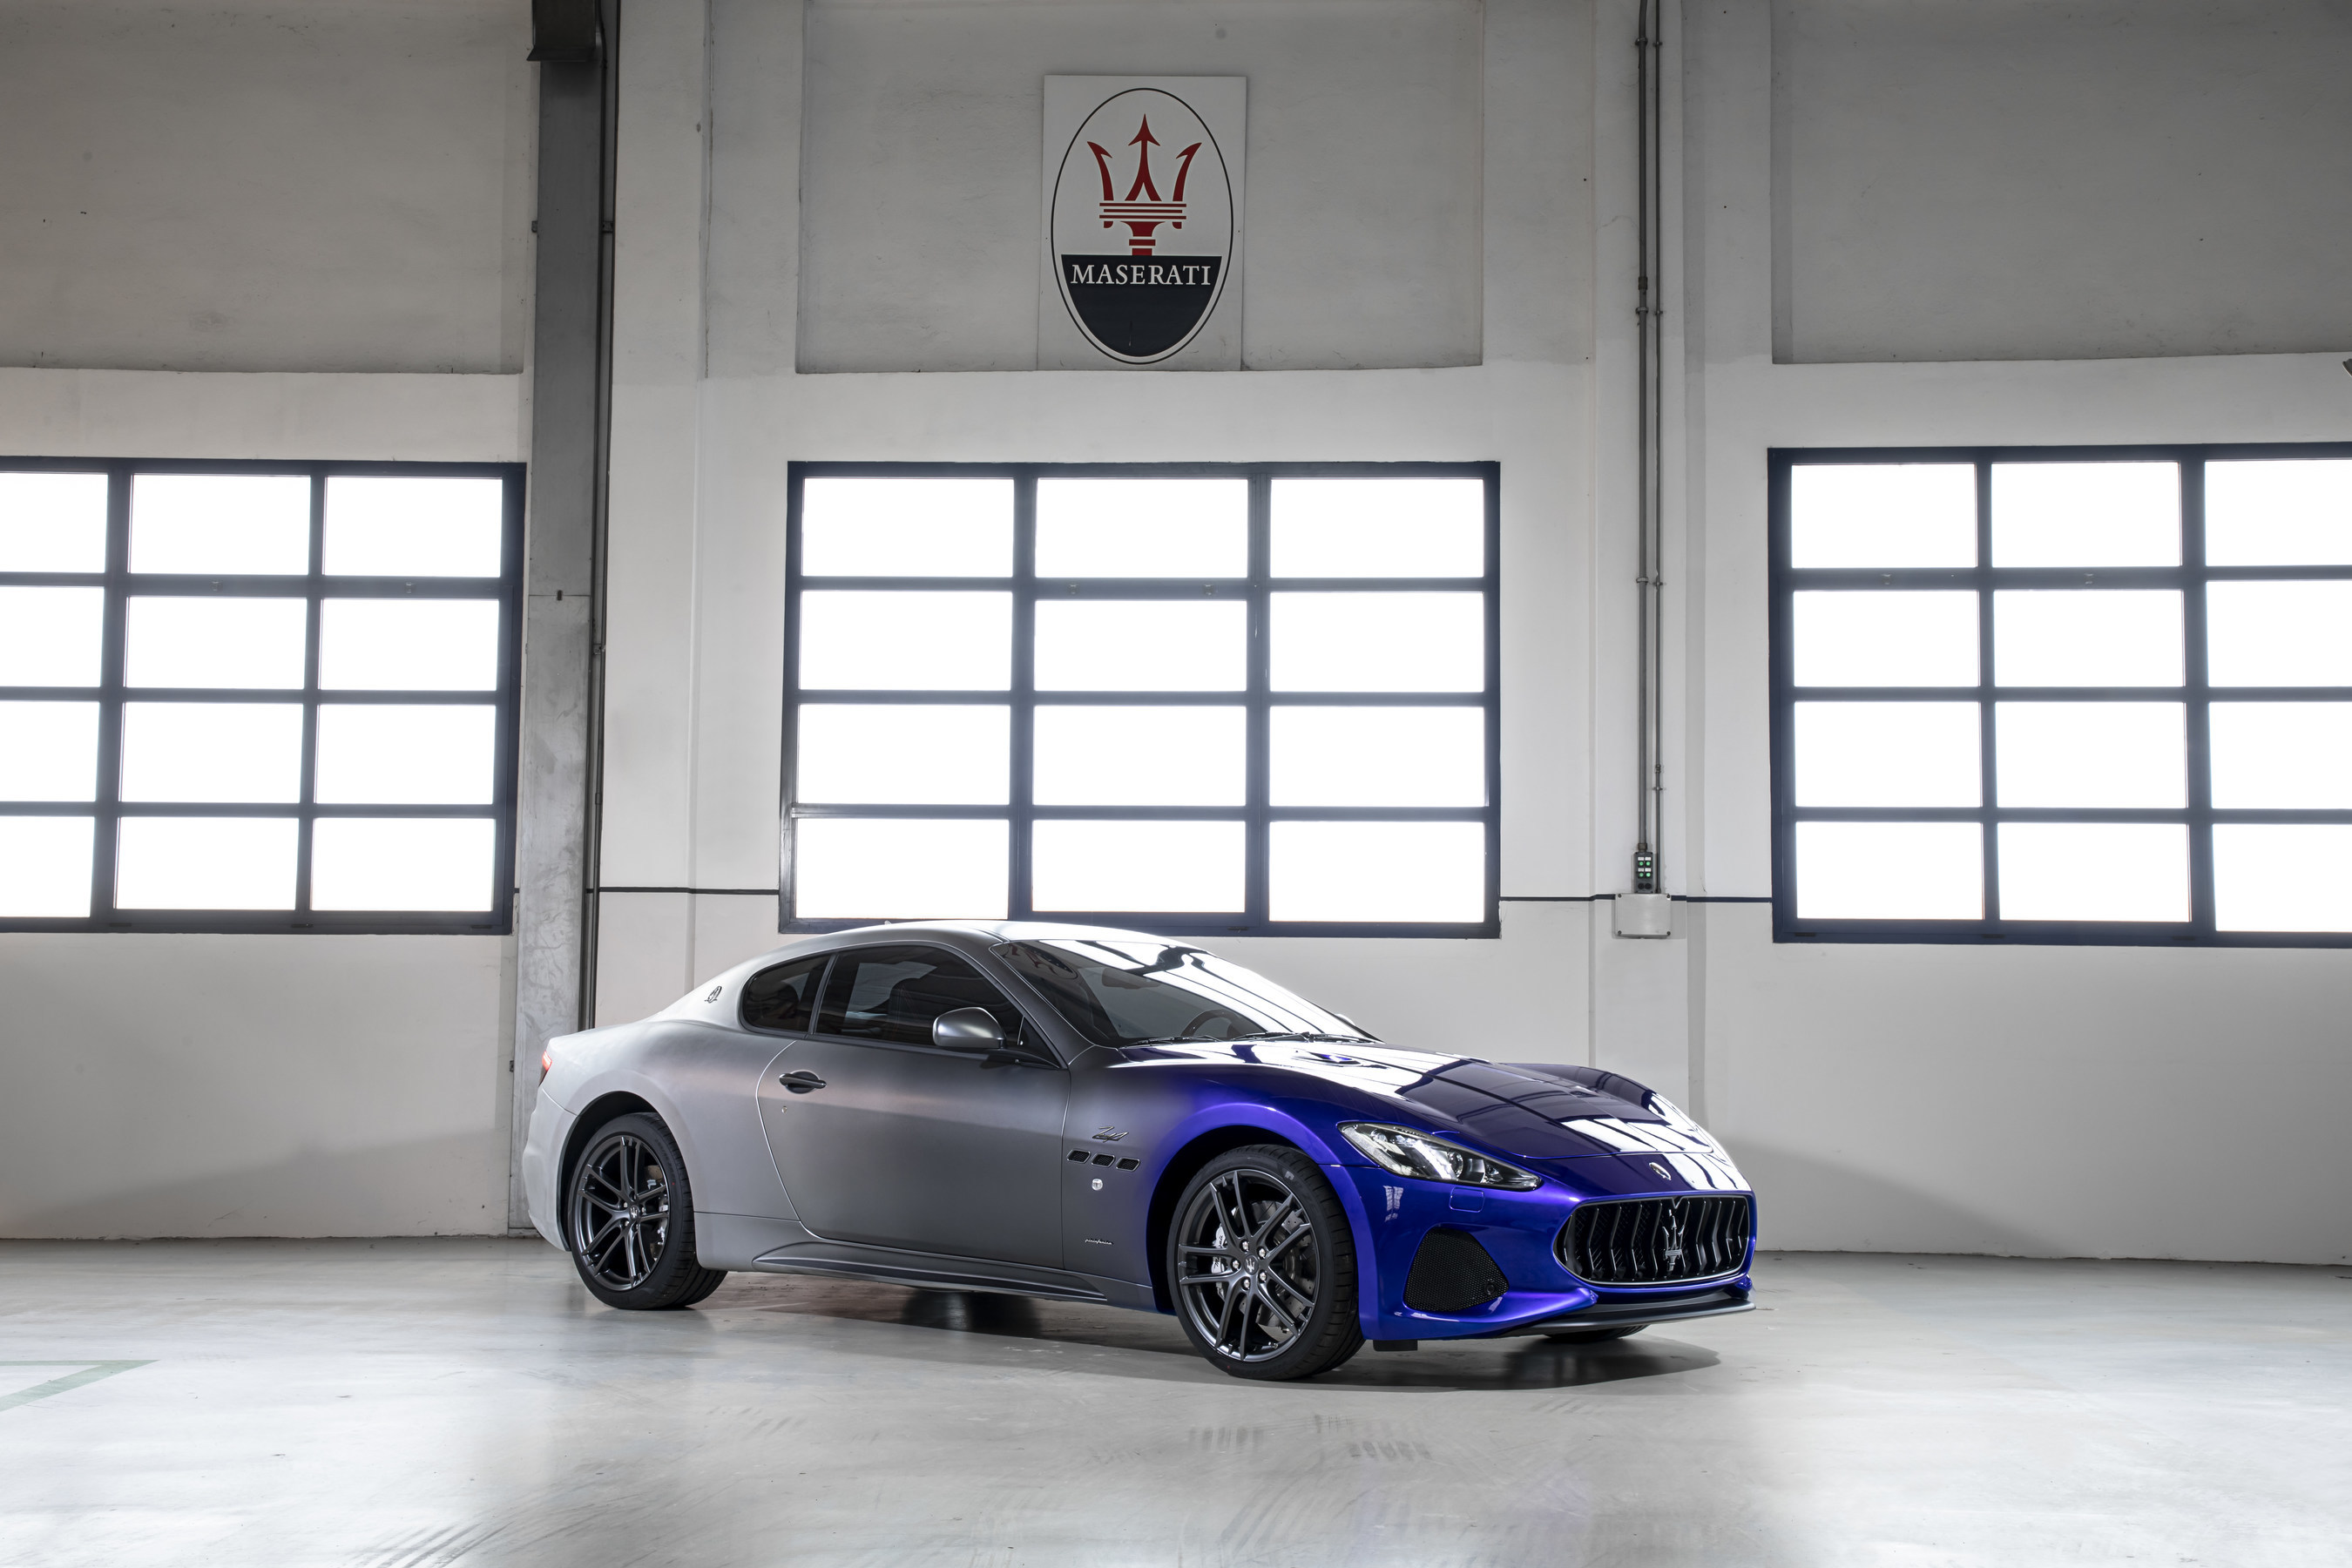 GranTurismo Zèda projects Maserati towards the future: from the Modena plant the new era for the Brand begins.